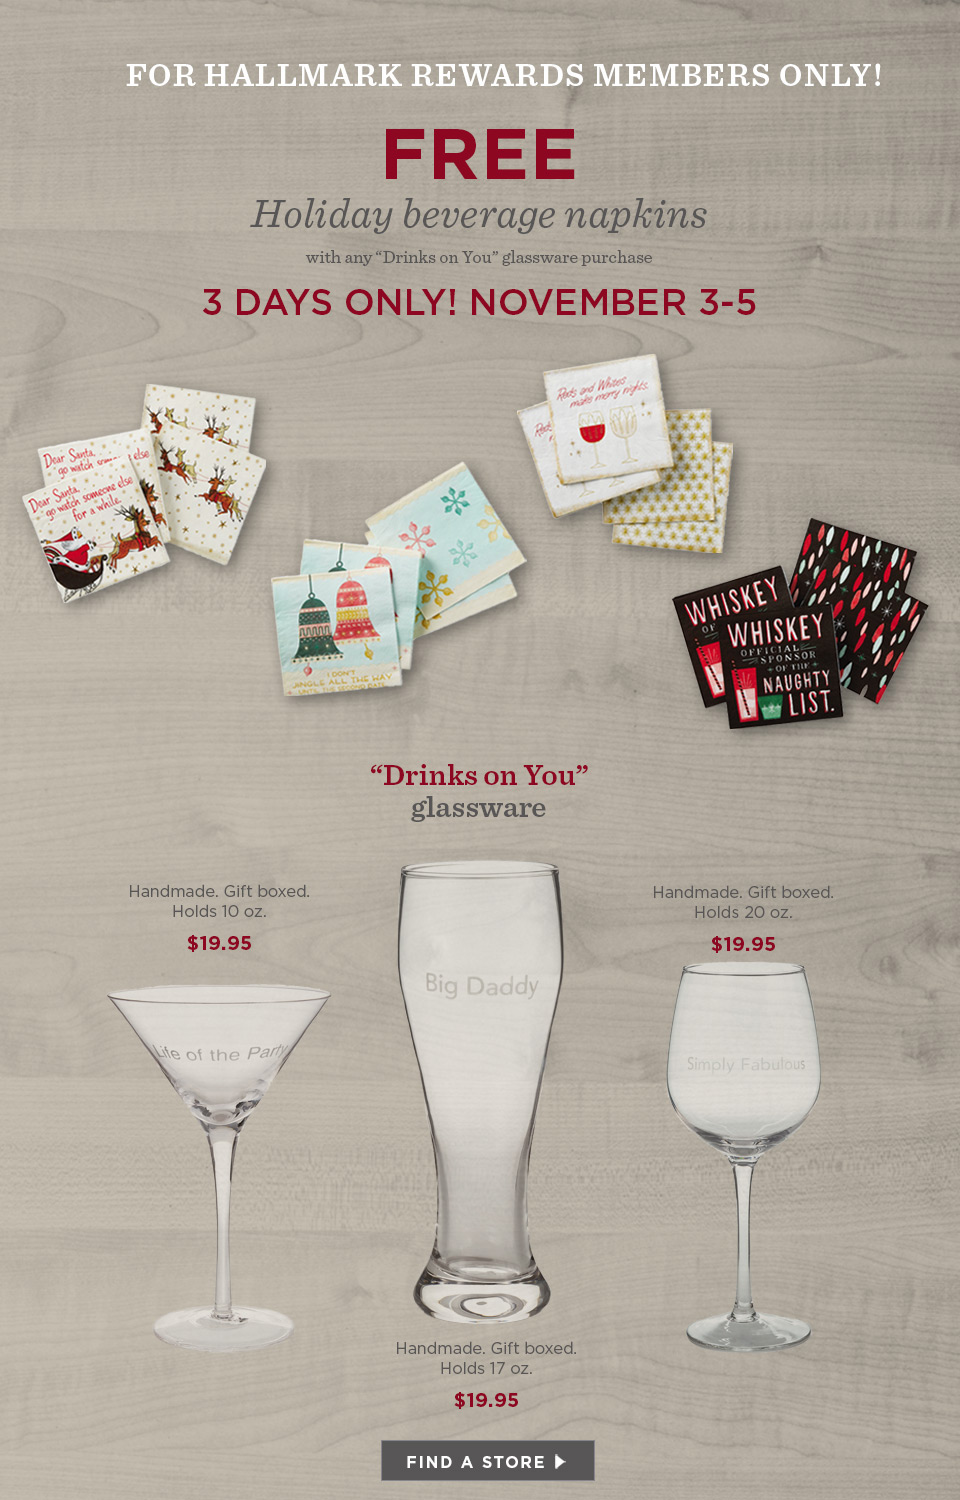 FREE Holiday beverage napkins - with any 'Drinks on You' glassware purchase